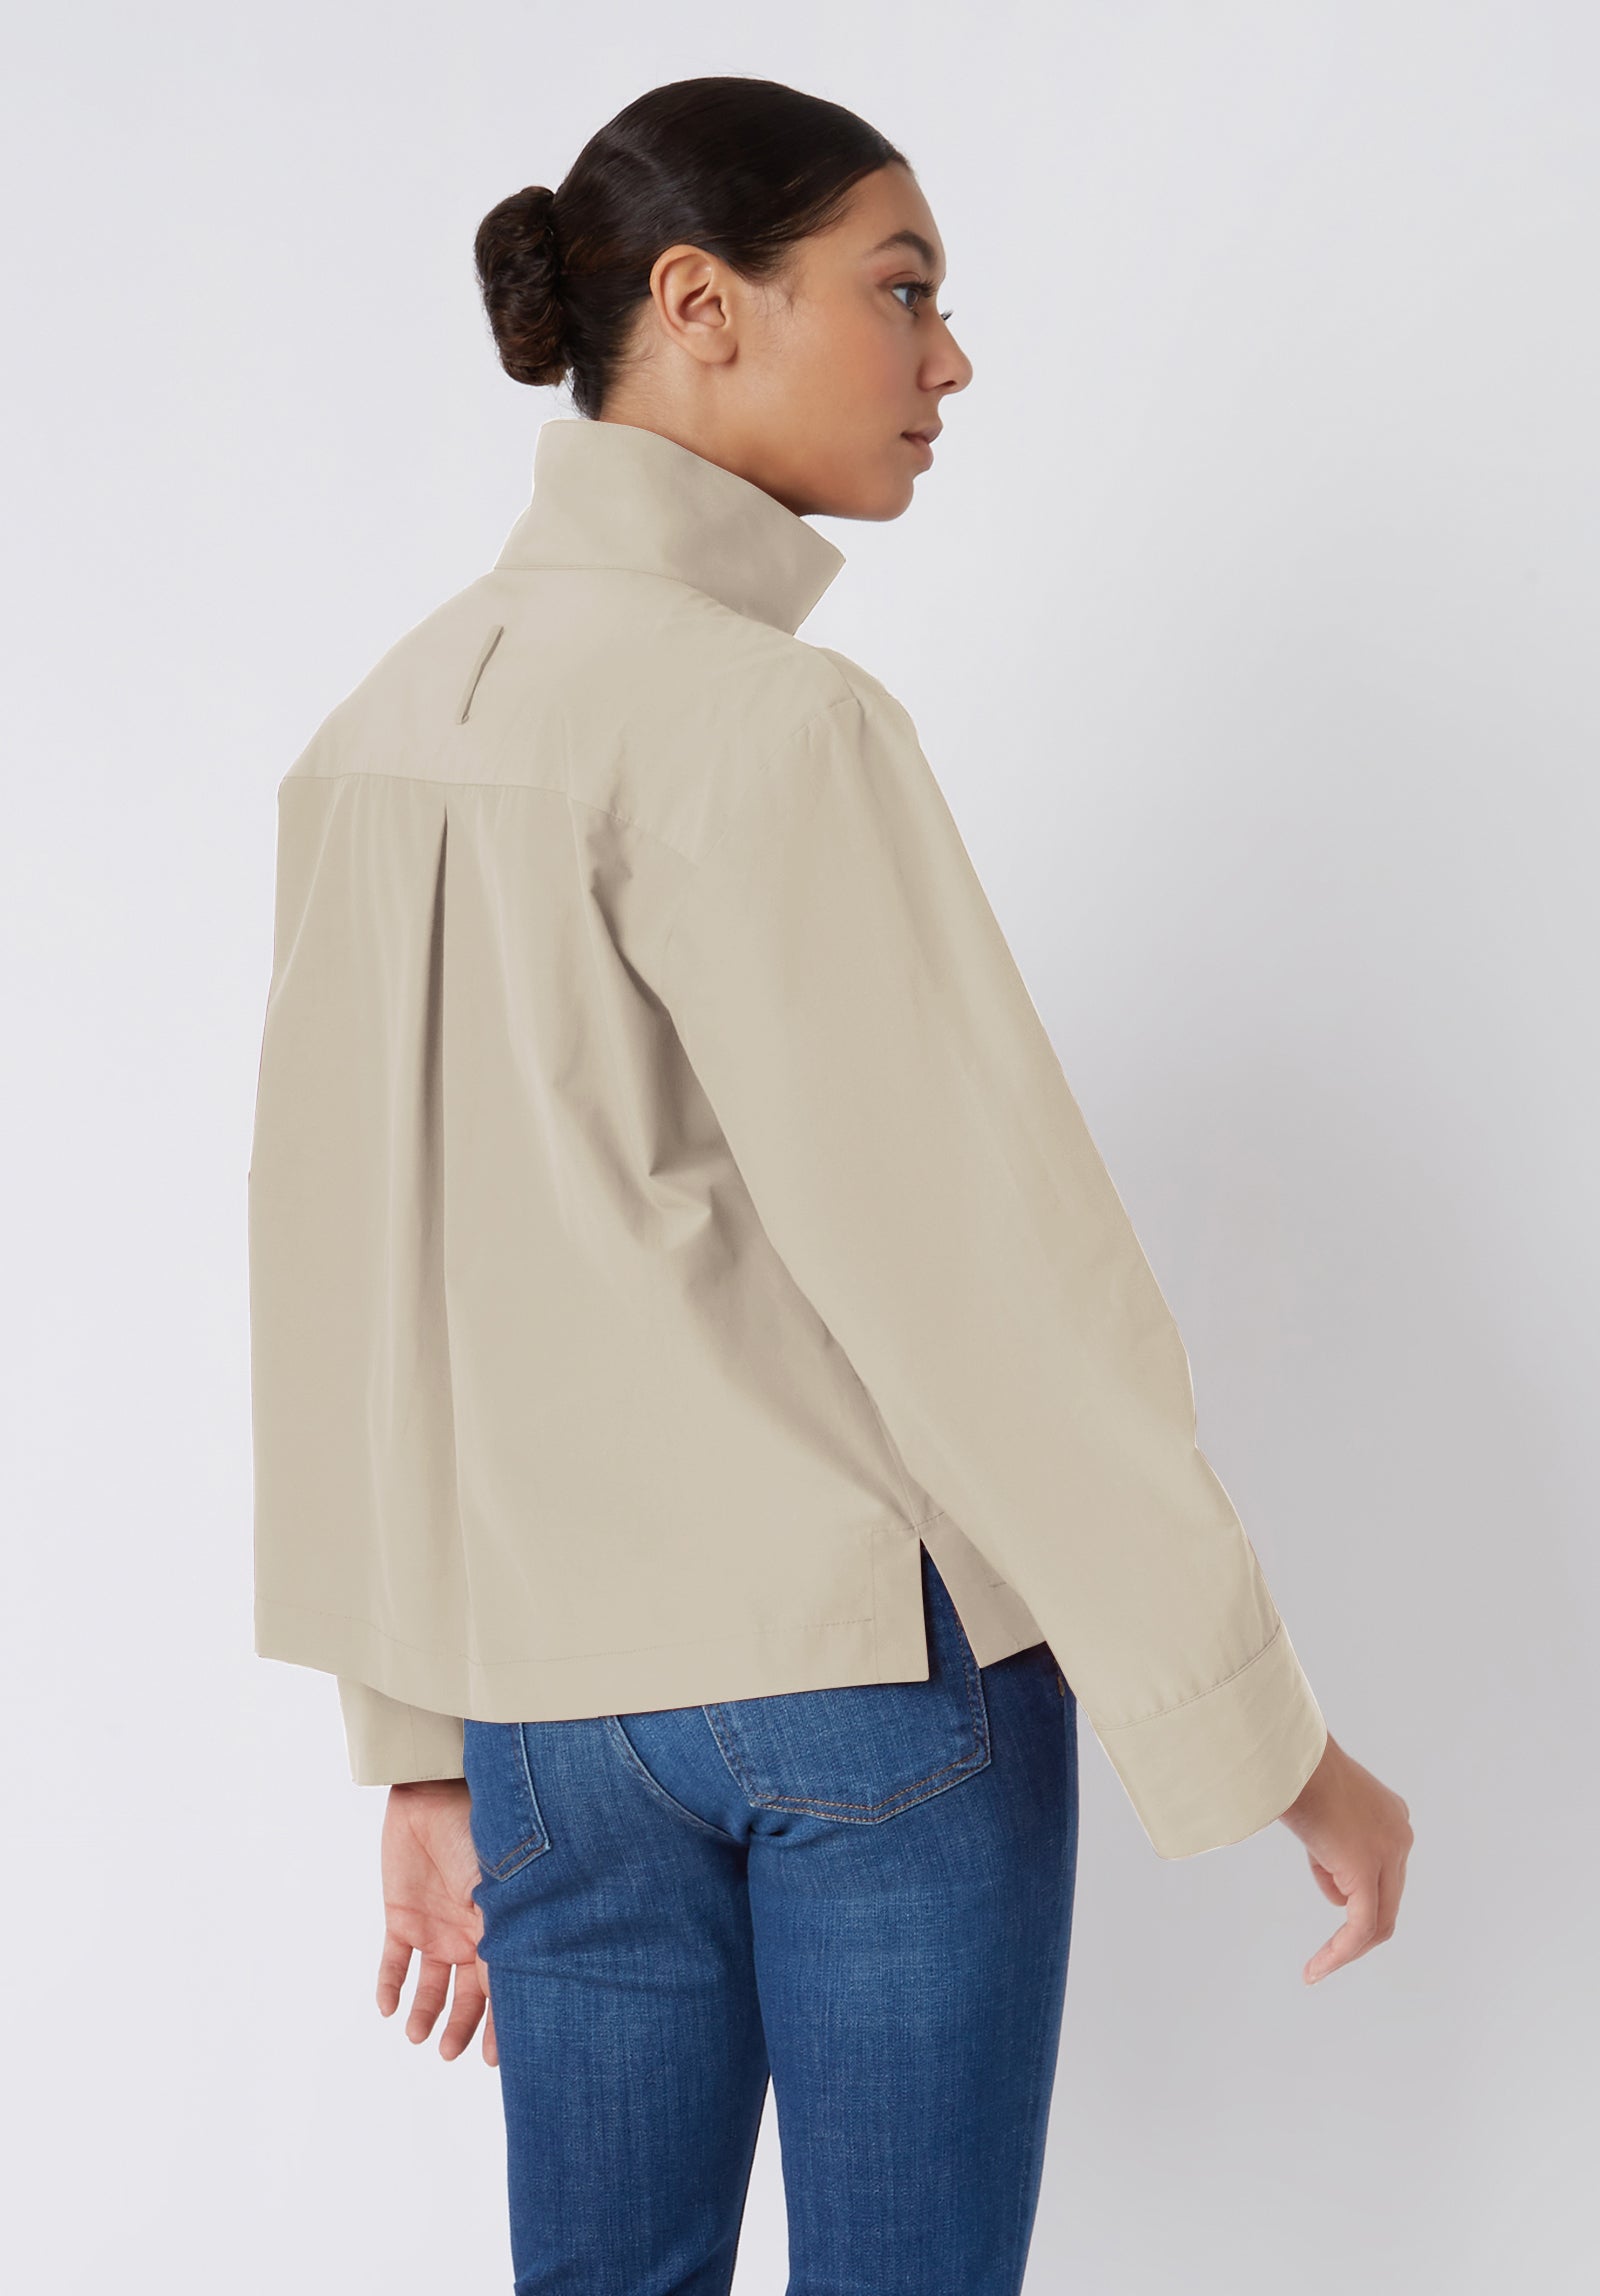 Kal Rieman Peggy Collared Shirt in Classic Khaki Broadcloth on Model Smiling Cropped Front View